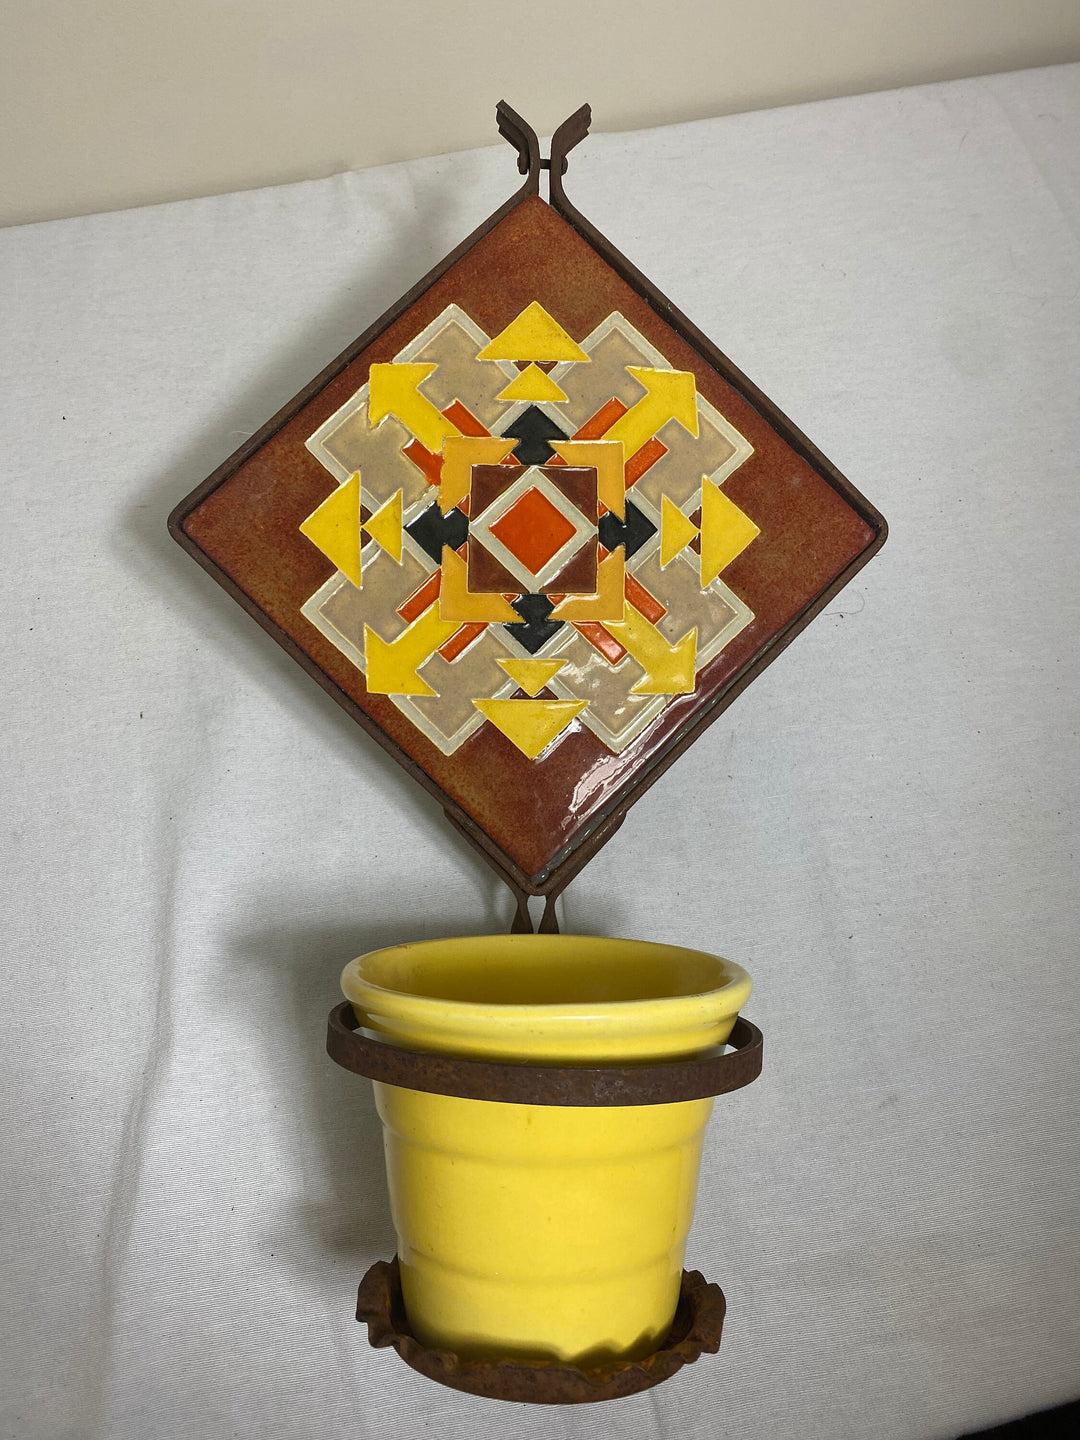 Vintage Claycraft 8" Tile Wall Planter with Bauer flower pot